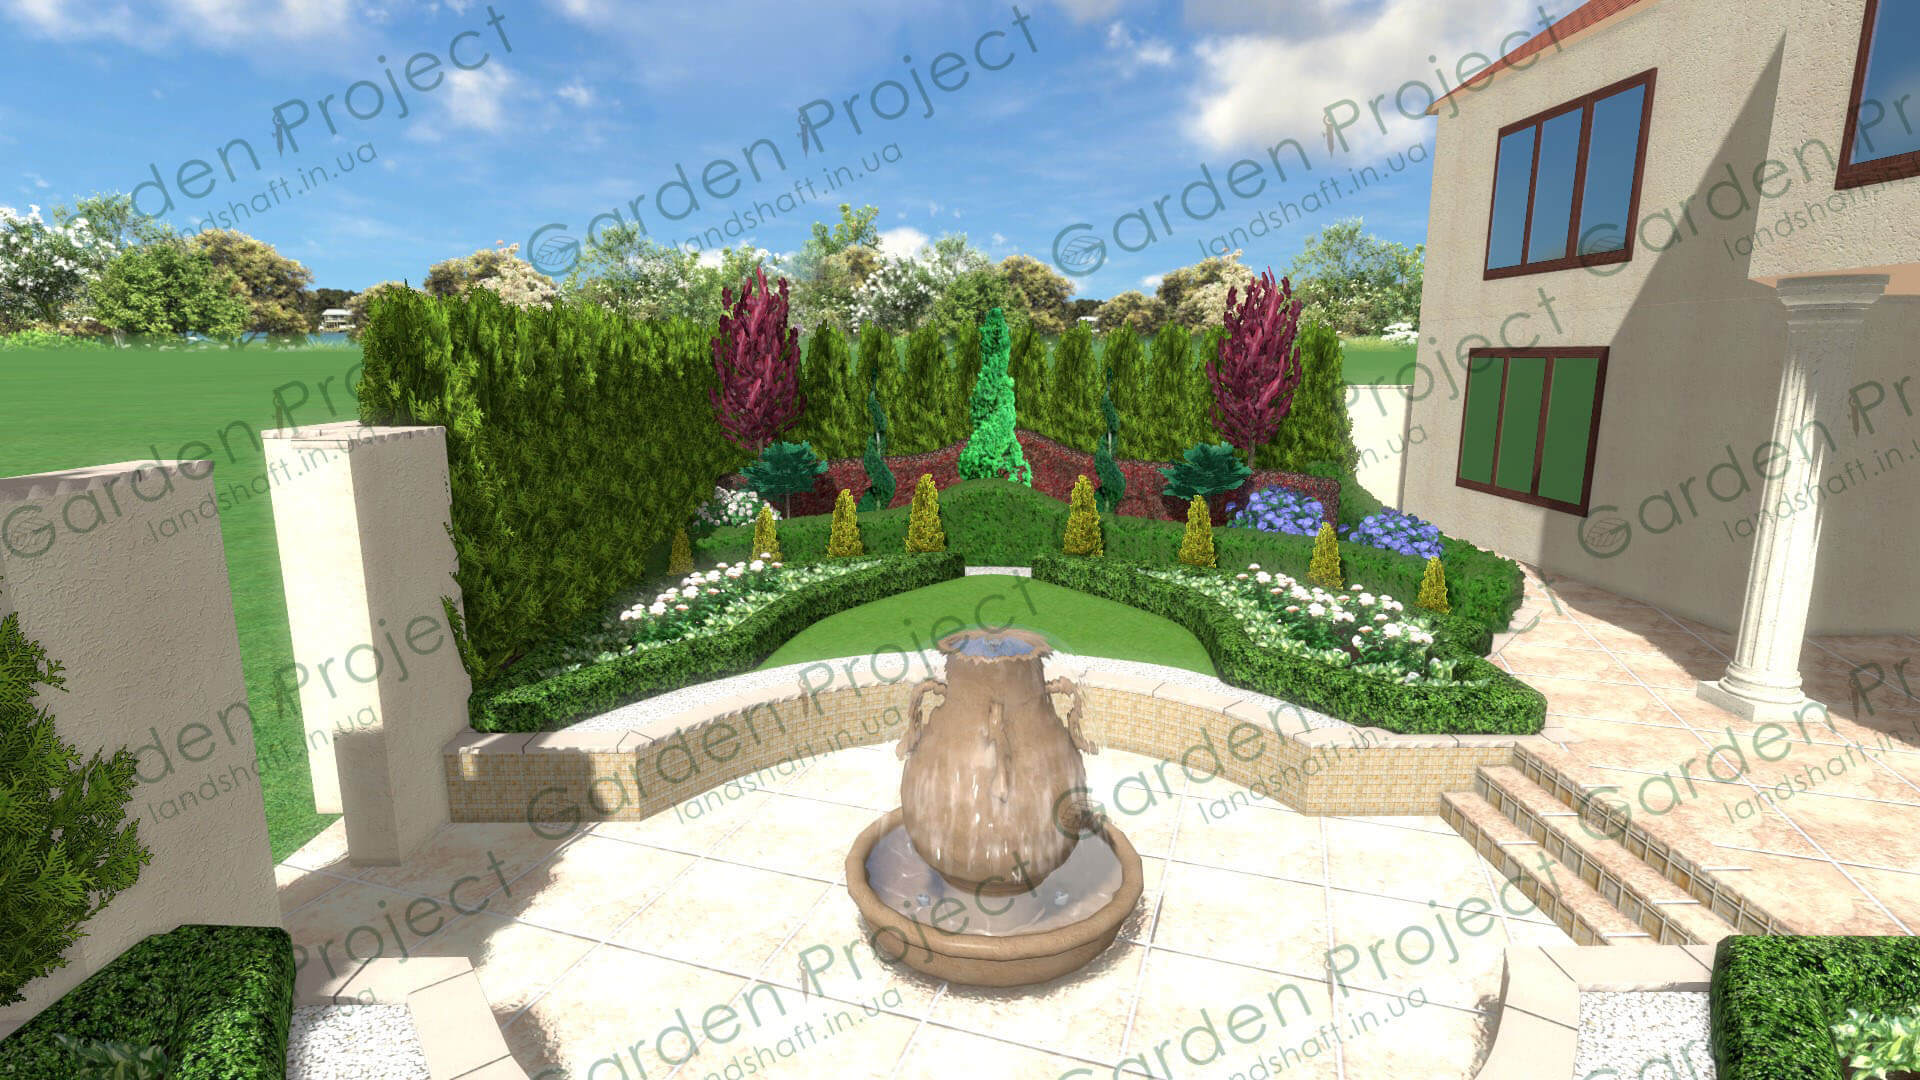 screenshot of the project